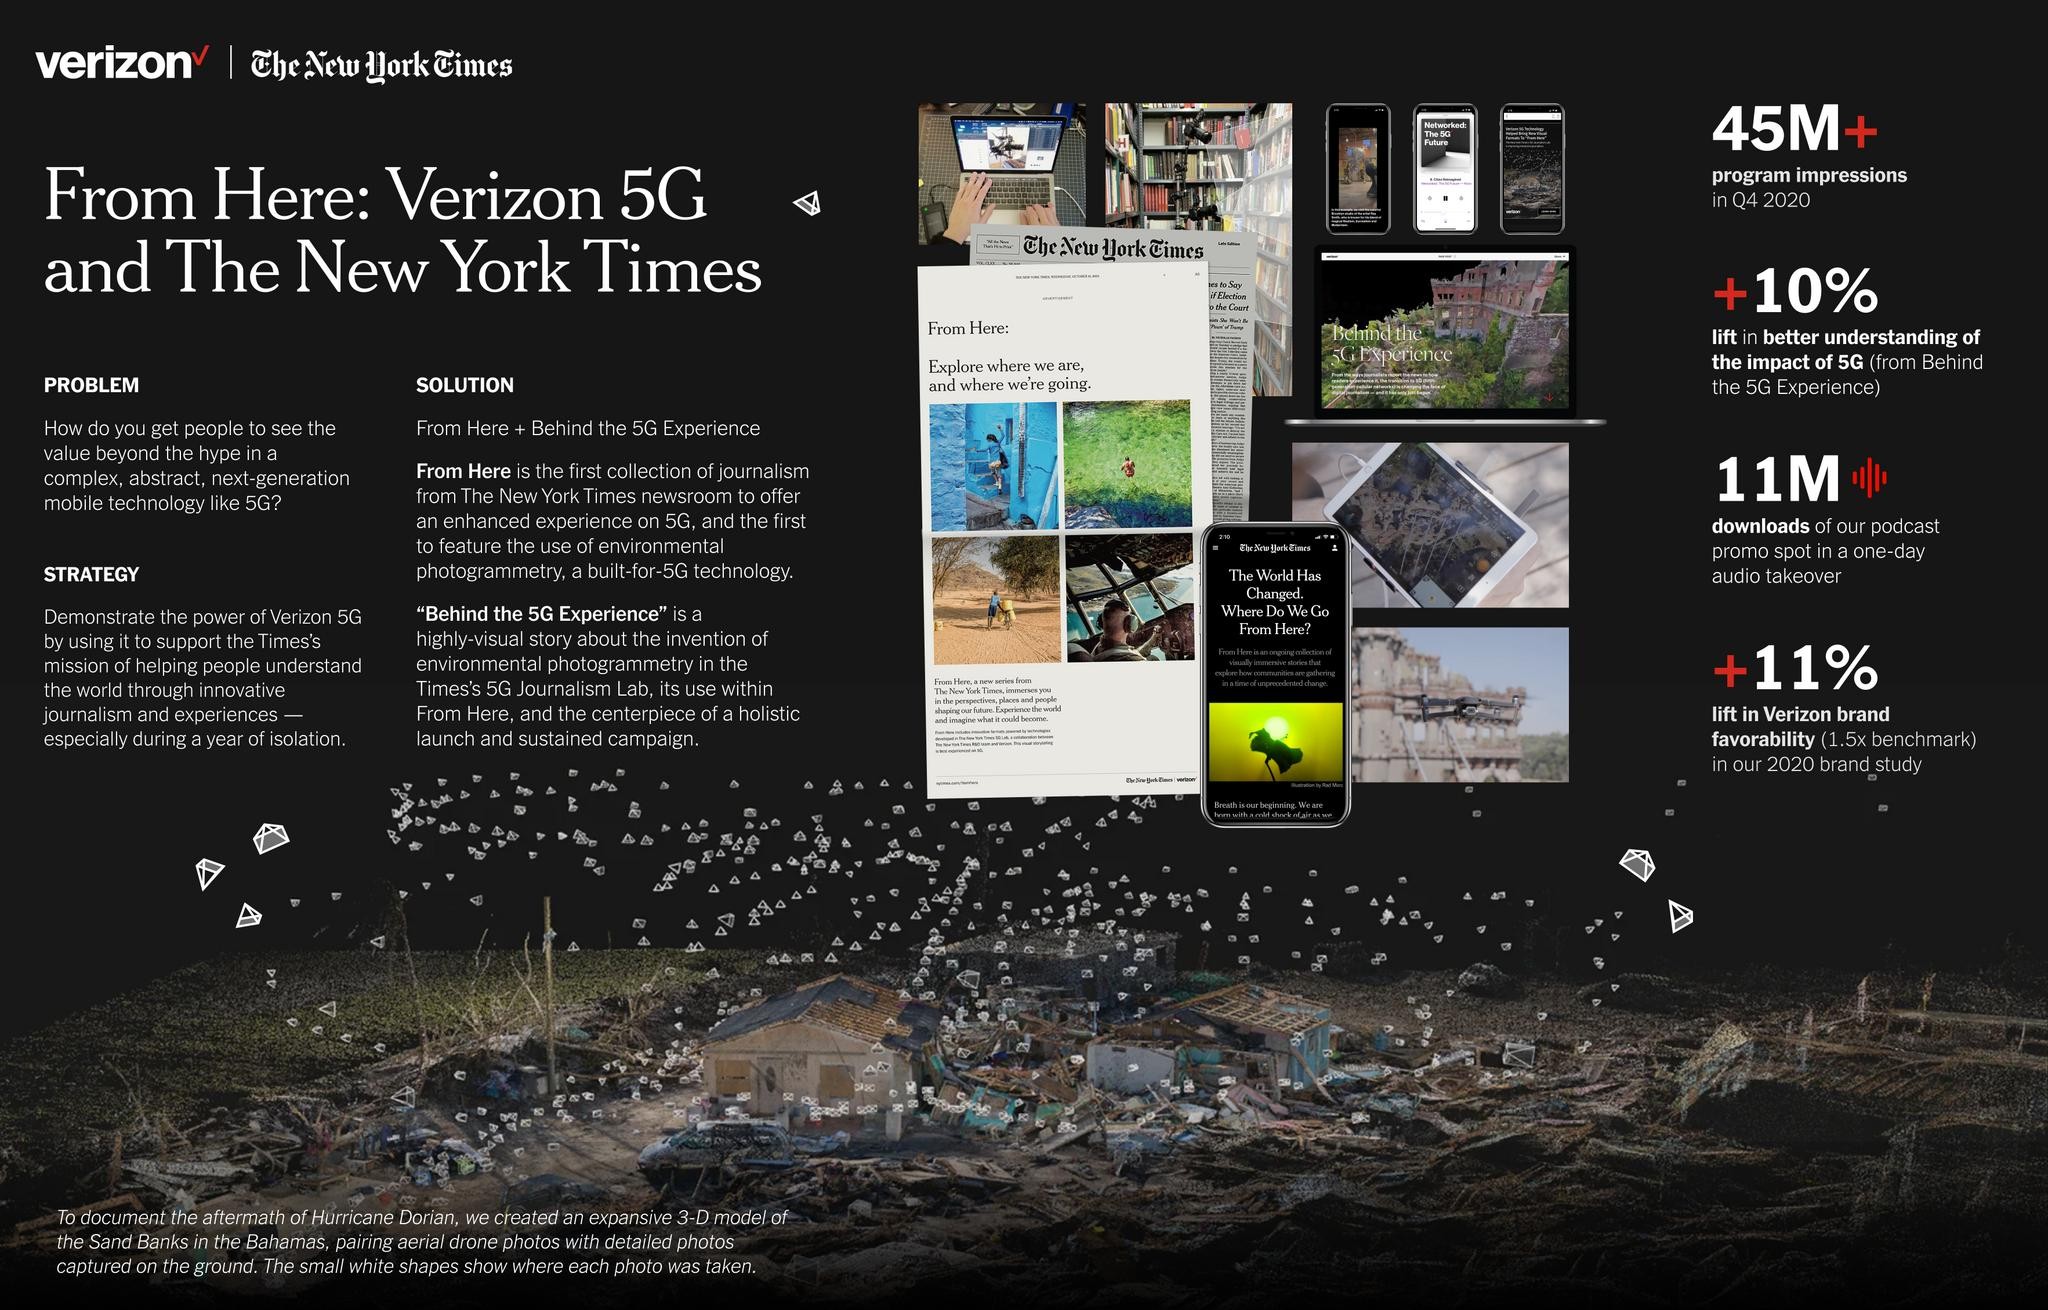 From Here: The New York Times and Verizon